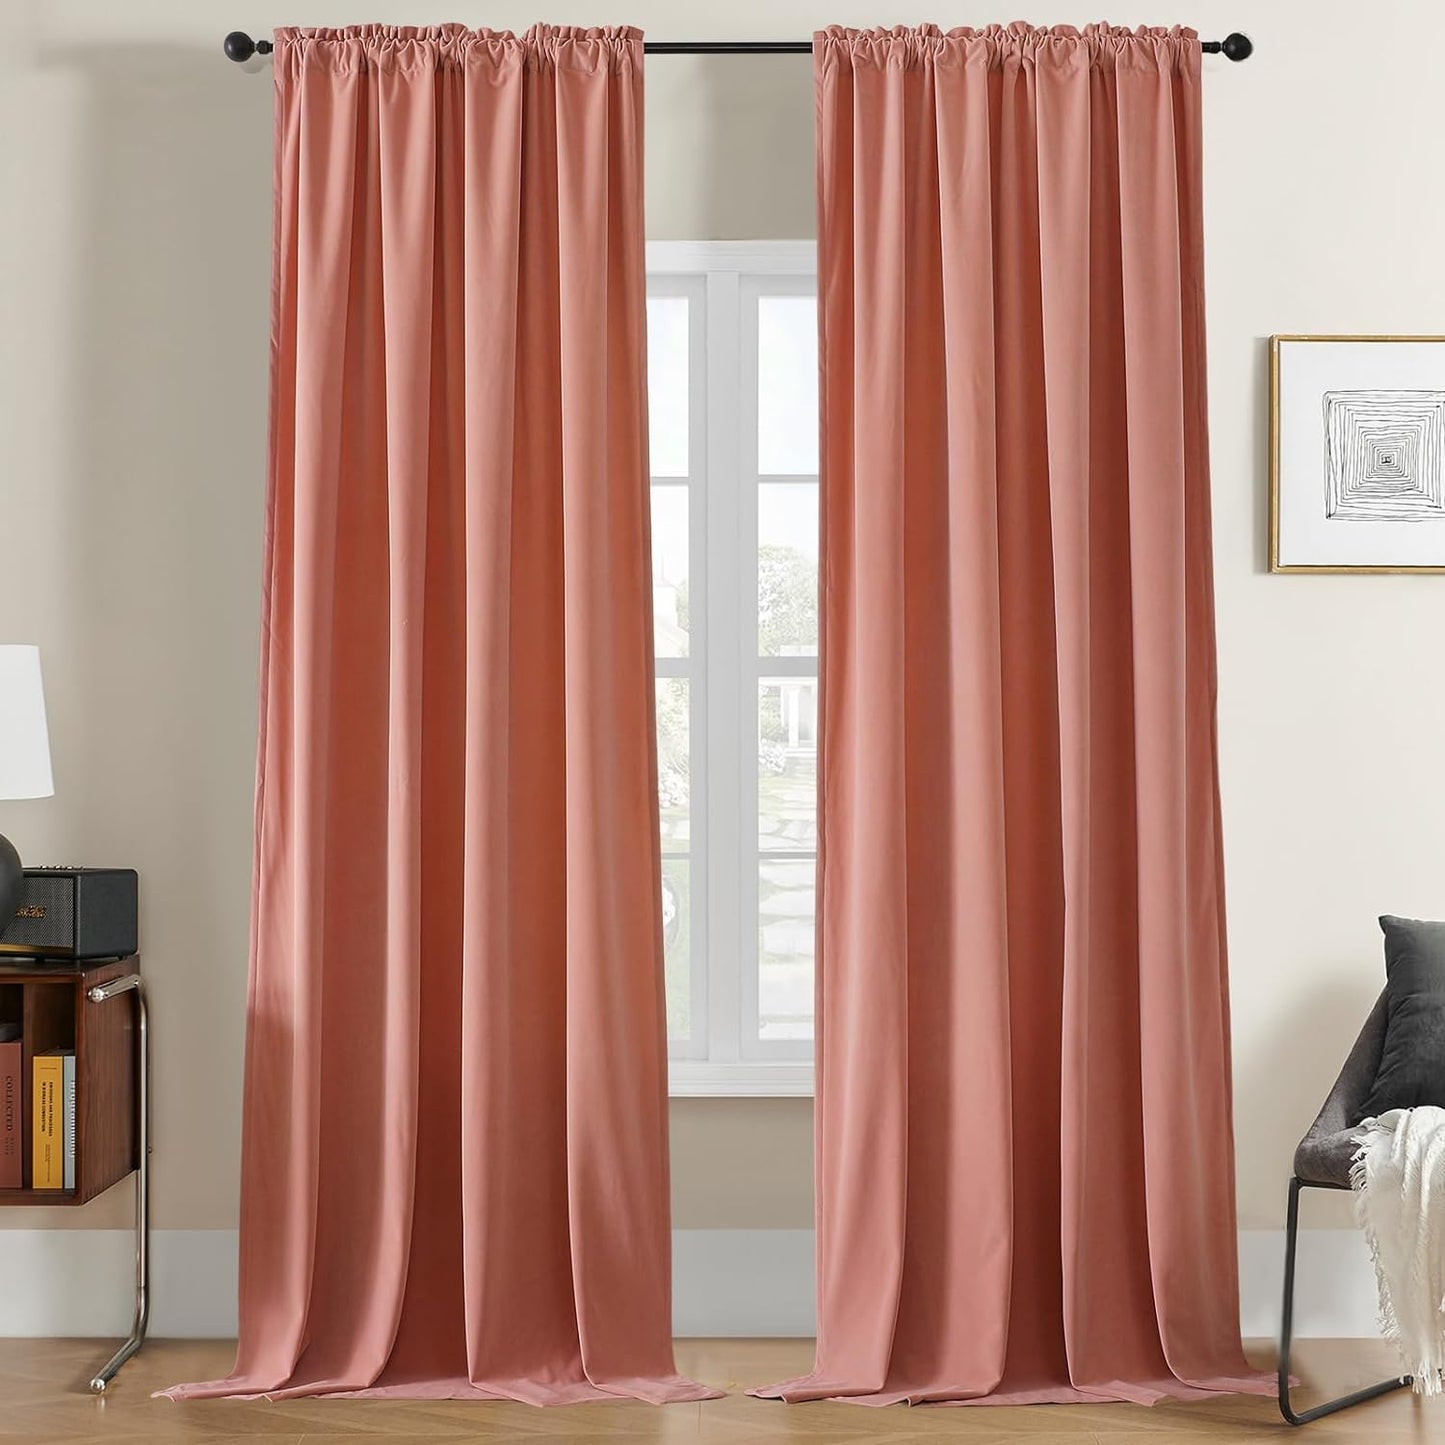 Joydeco Black Velvet Curtains 90 Inch Length 2 Panels, Luxury Blackout Rod Pocket Thermal Insulated Window Curtains, Super Soft Room Darkening Drapes for Living Dining Room Bedroom,W52 X L90 Inches  Joydeco Rod Pocket | Pink 52W X 84L Inch X 2 Panels 